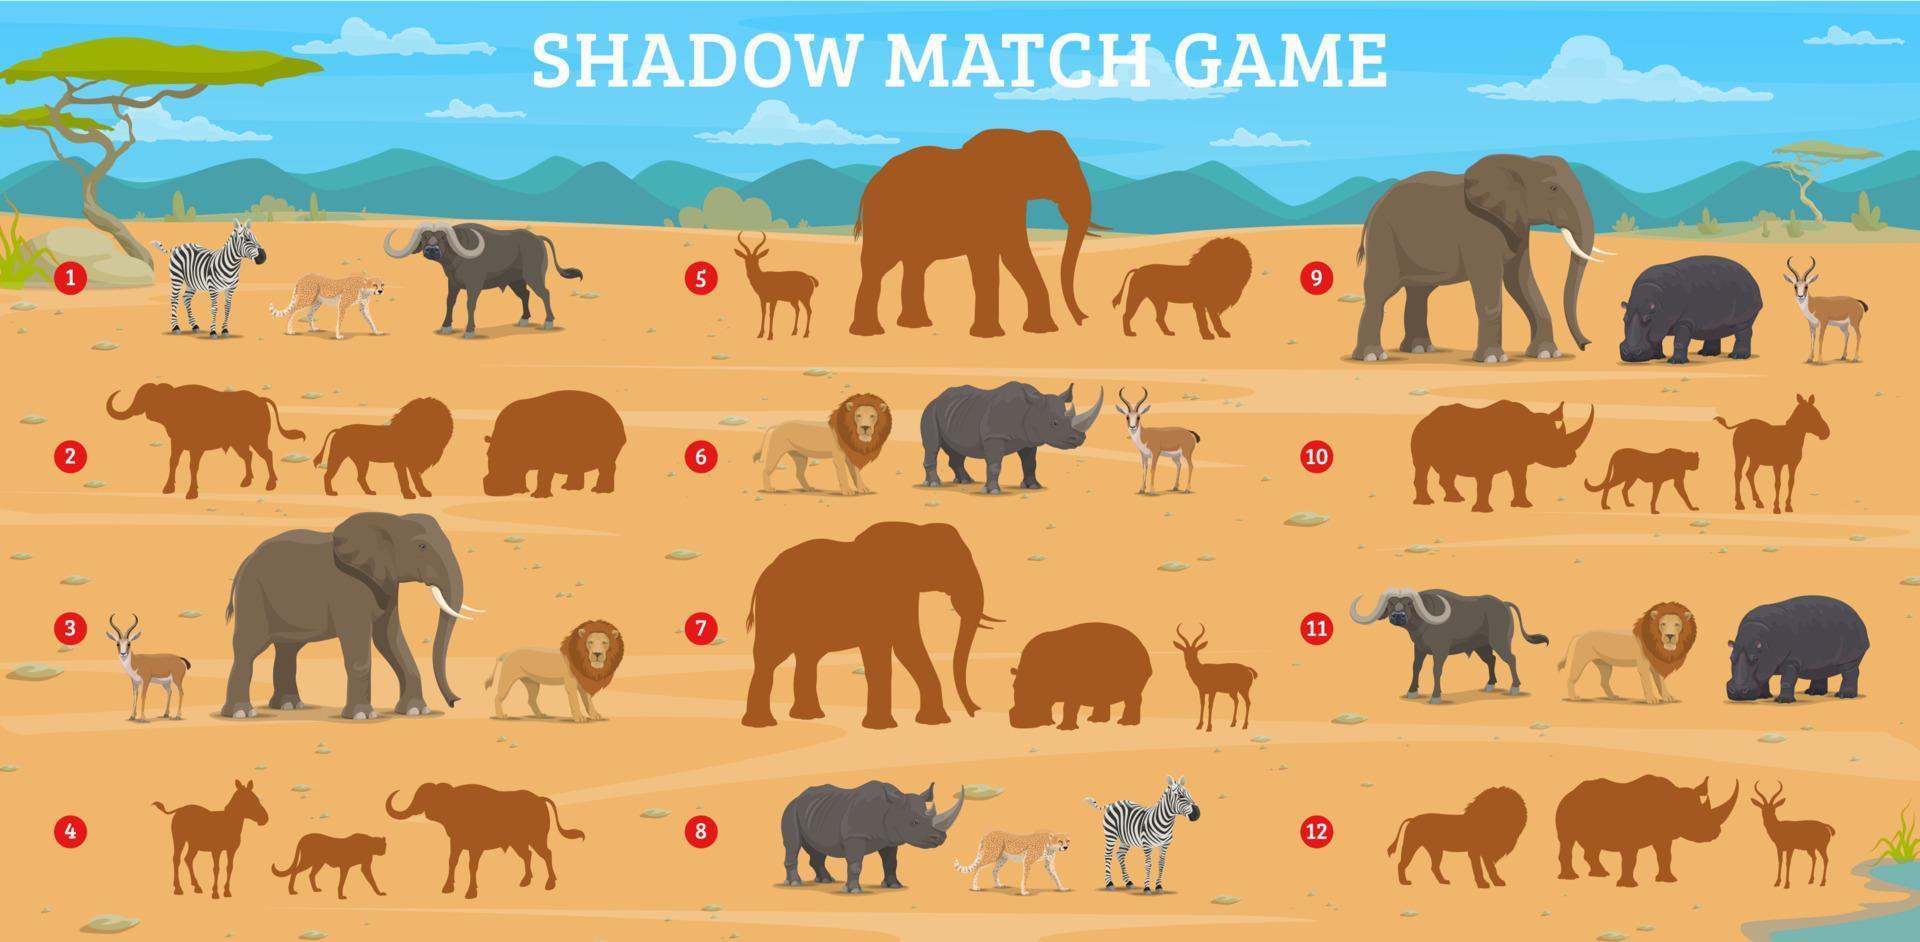 Shadow match game with african savannah animals vector